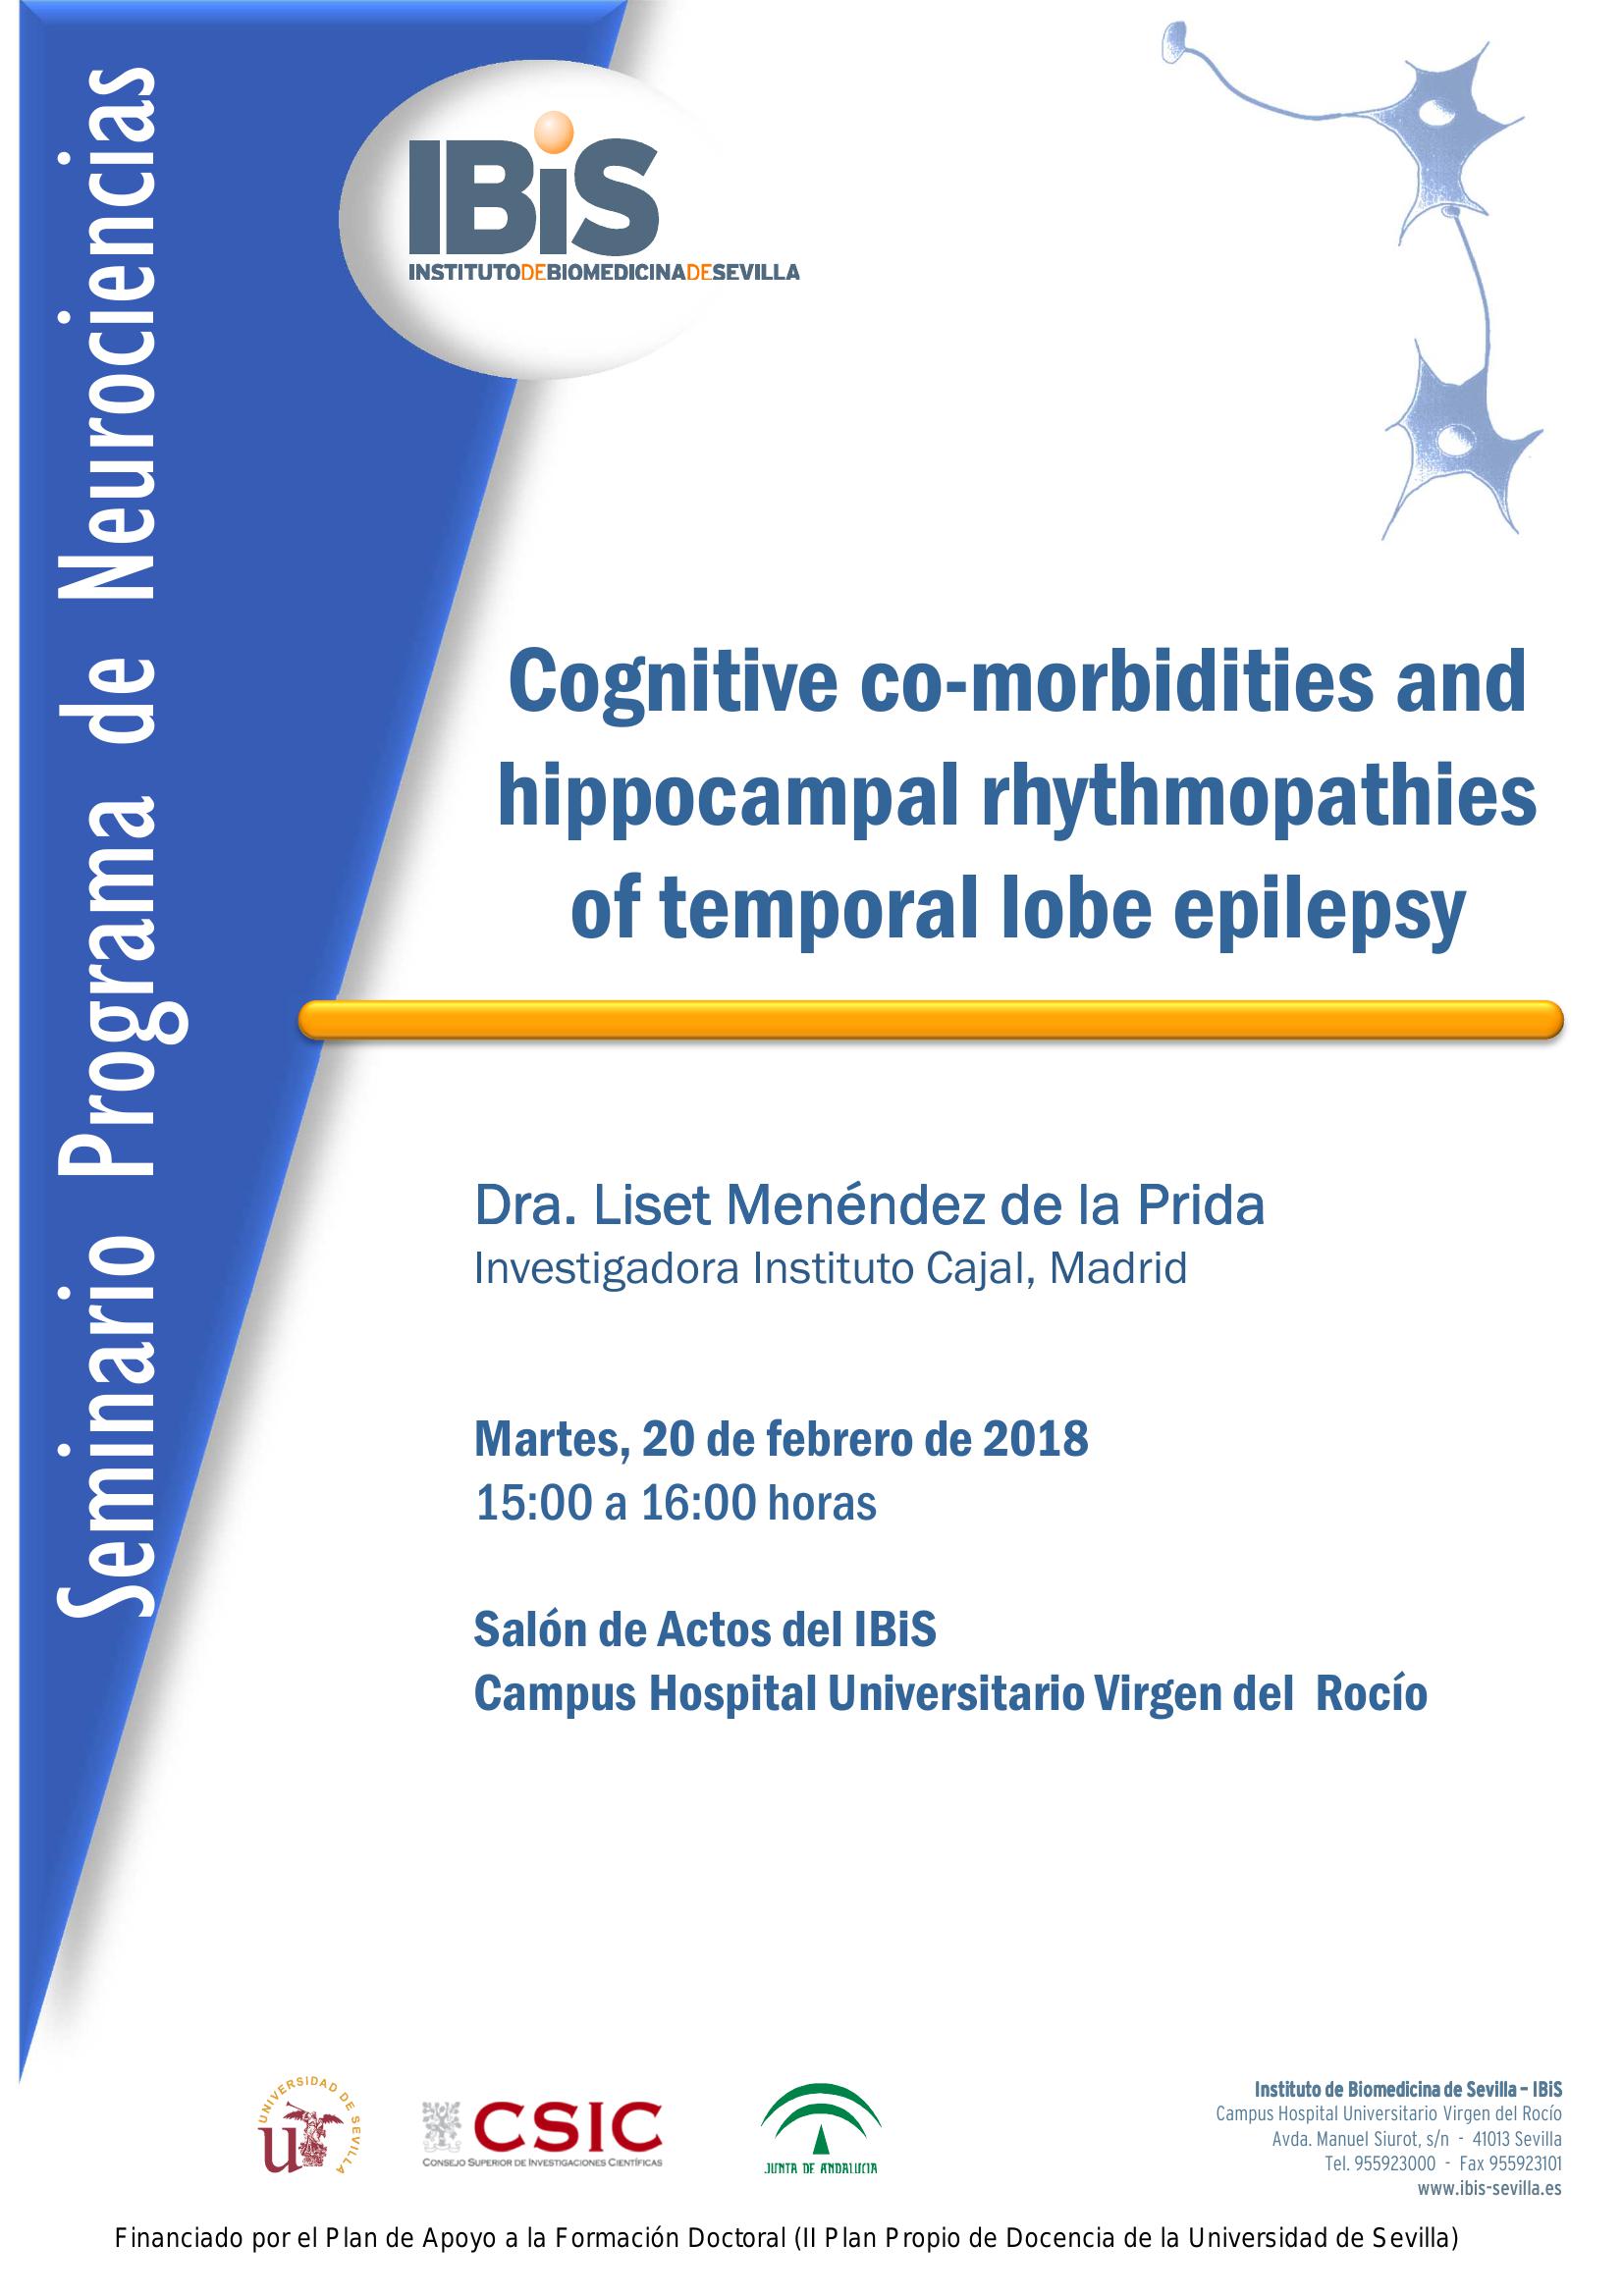 Poster: Cognitive co-morbidities and hippocampal rhythmopathies of temporal lobe epilepsy